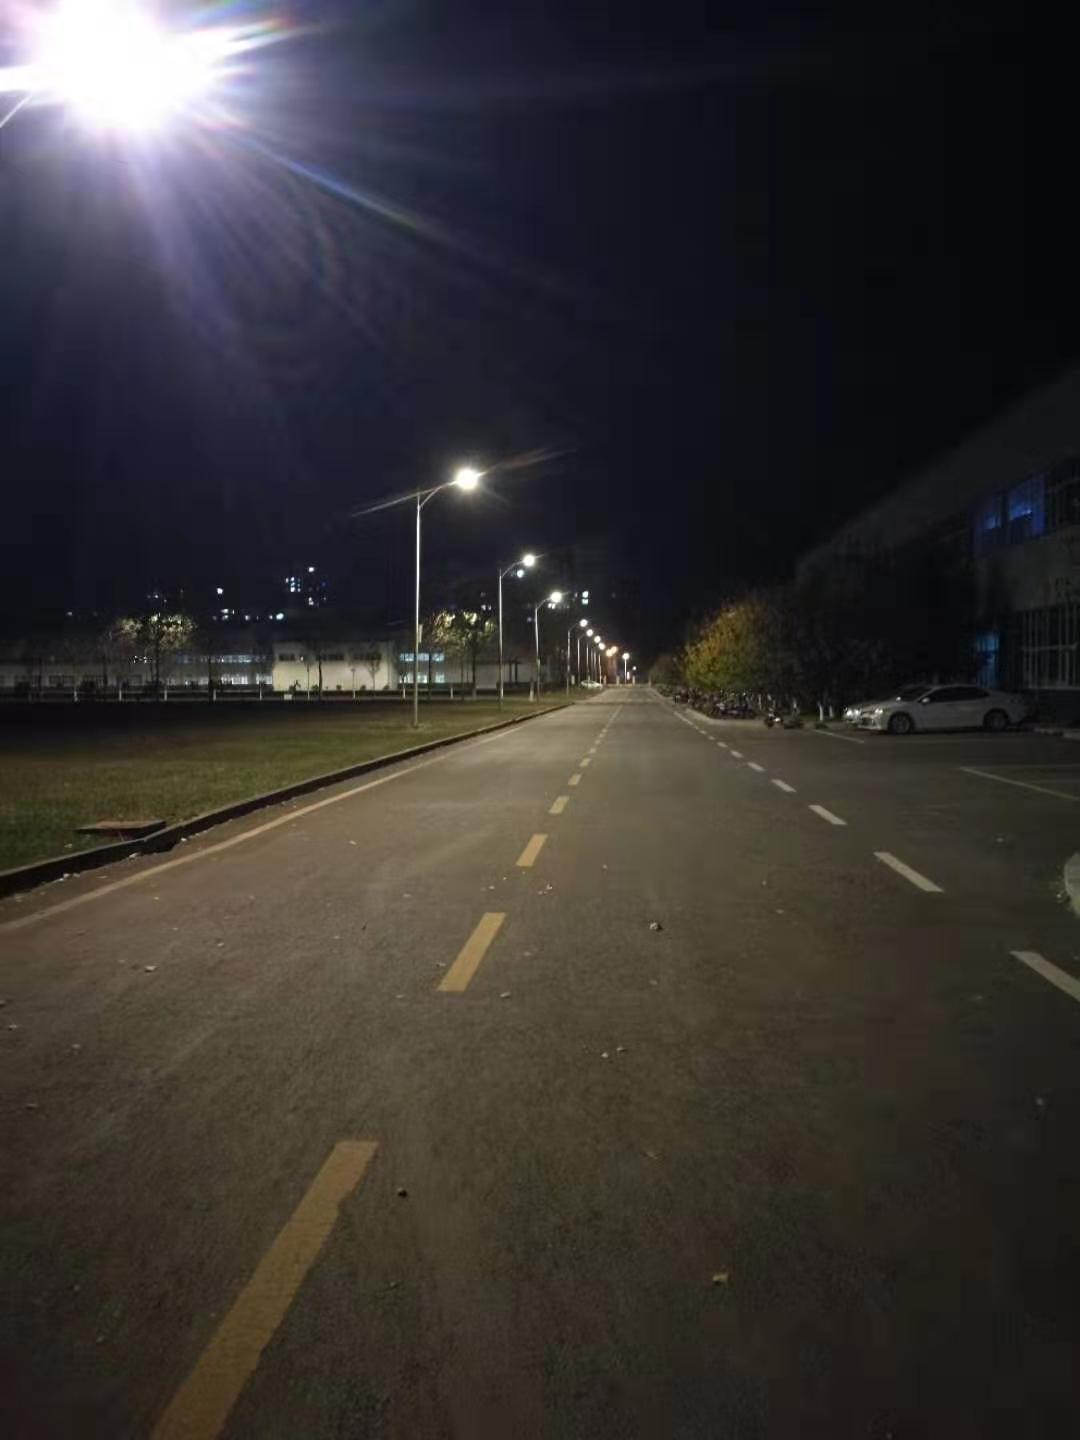 LED Street Lamp Light On City Road In Shenzhen of China